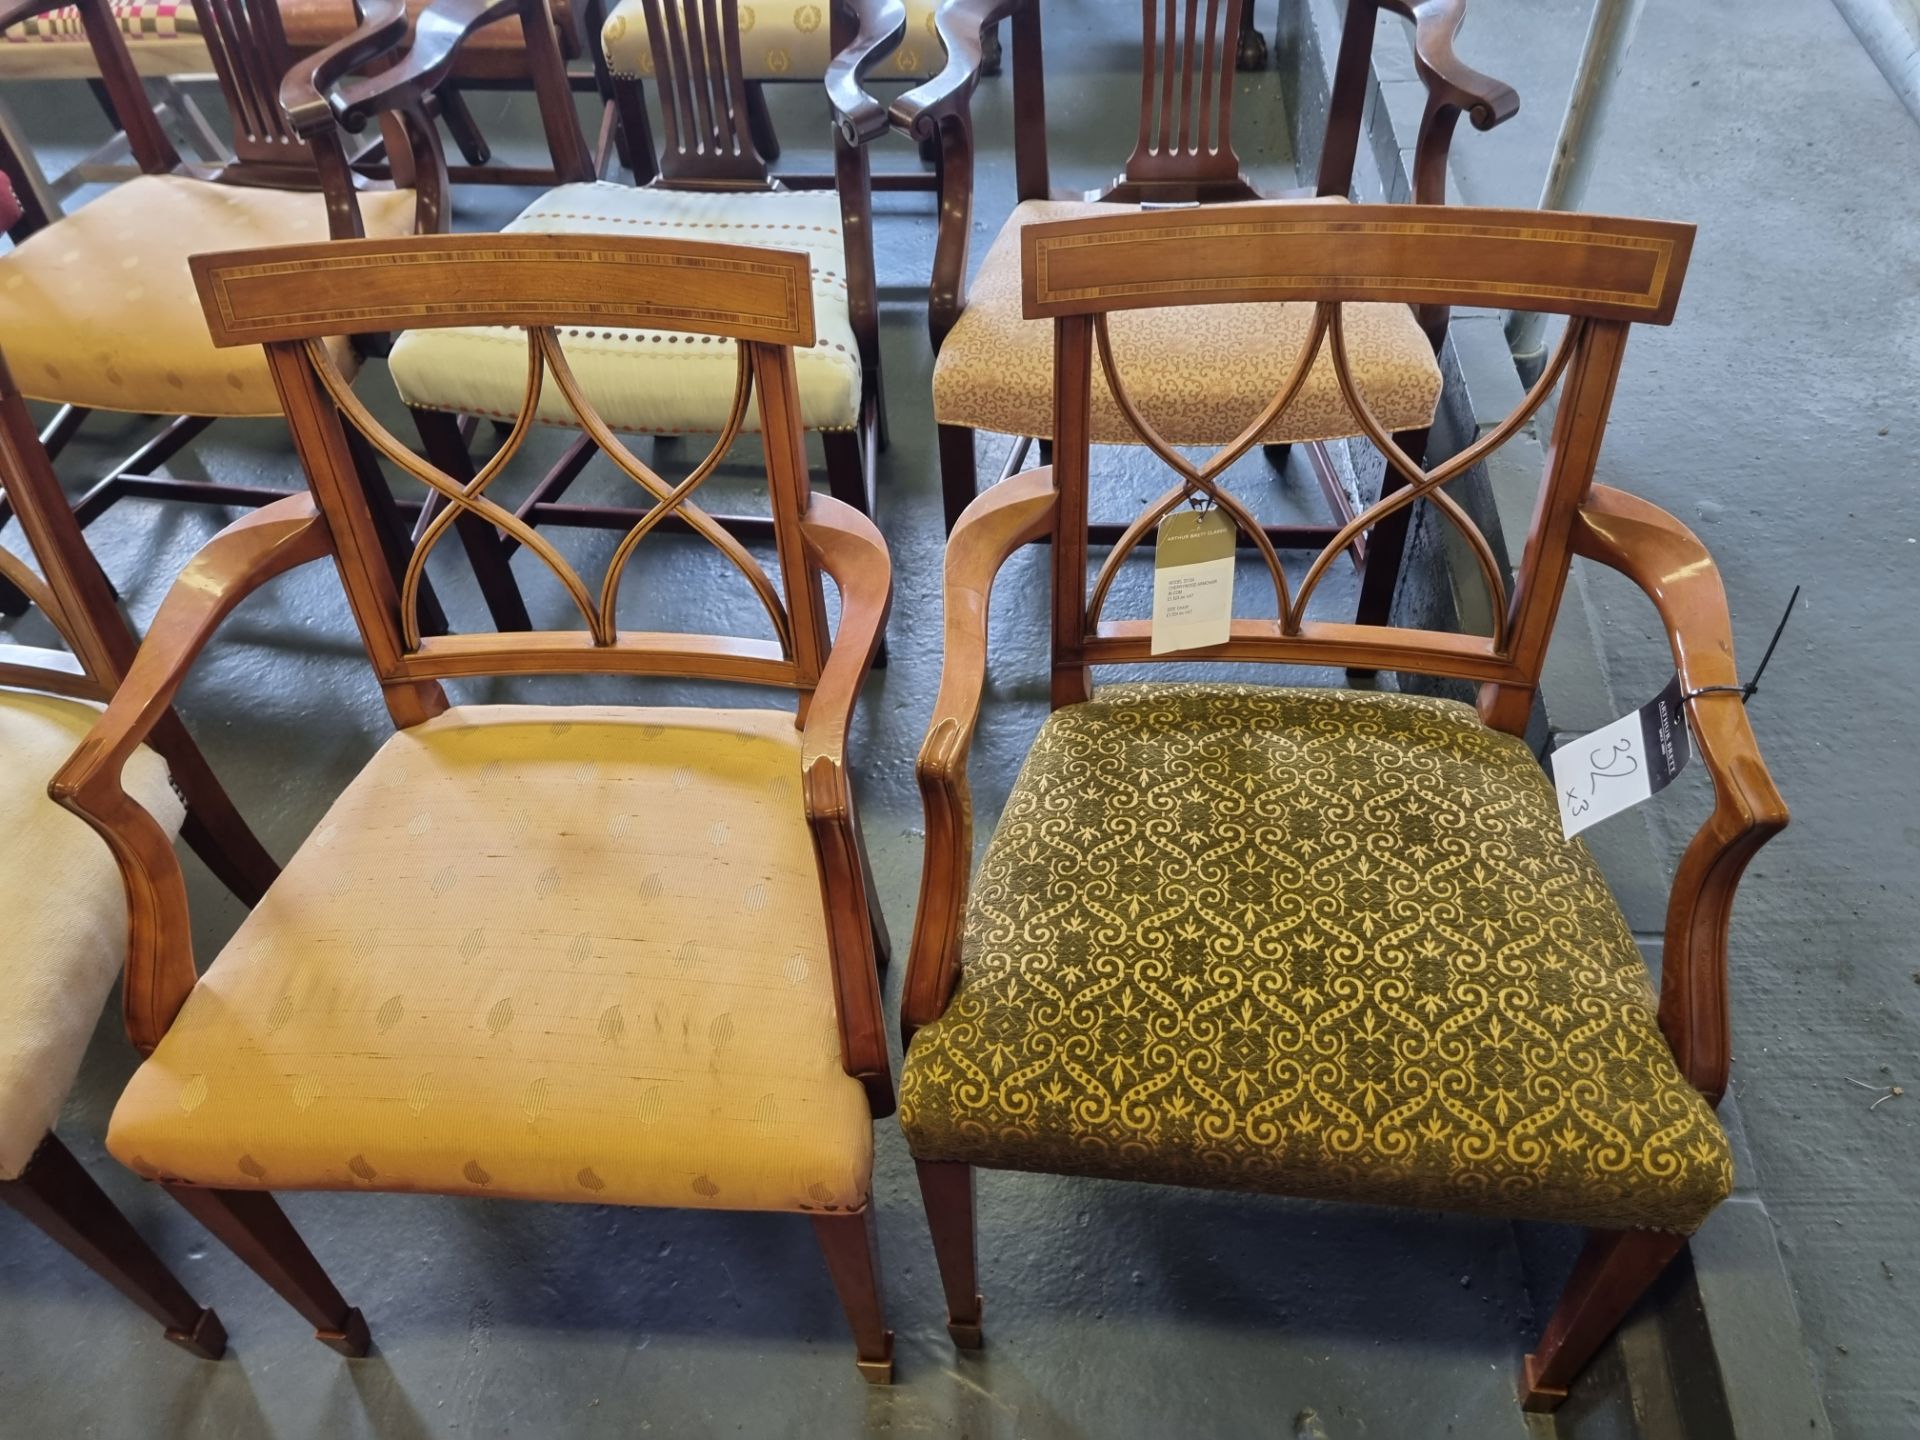 3 X Arthur Brett Sheraton-Style Cherrywood Upholstered Dining Chairs With Tulip-Wood Inlay In The - Image 4 of 5